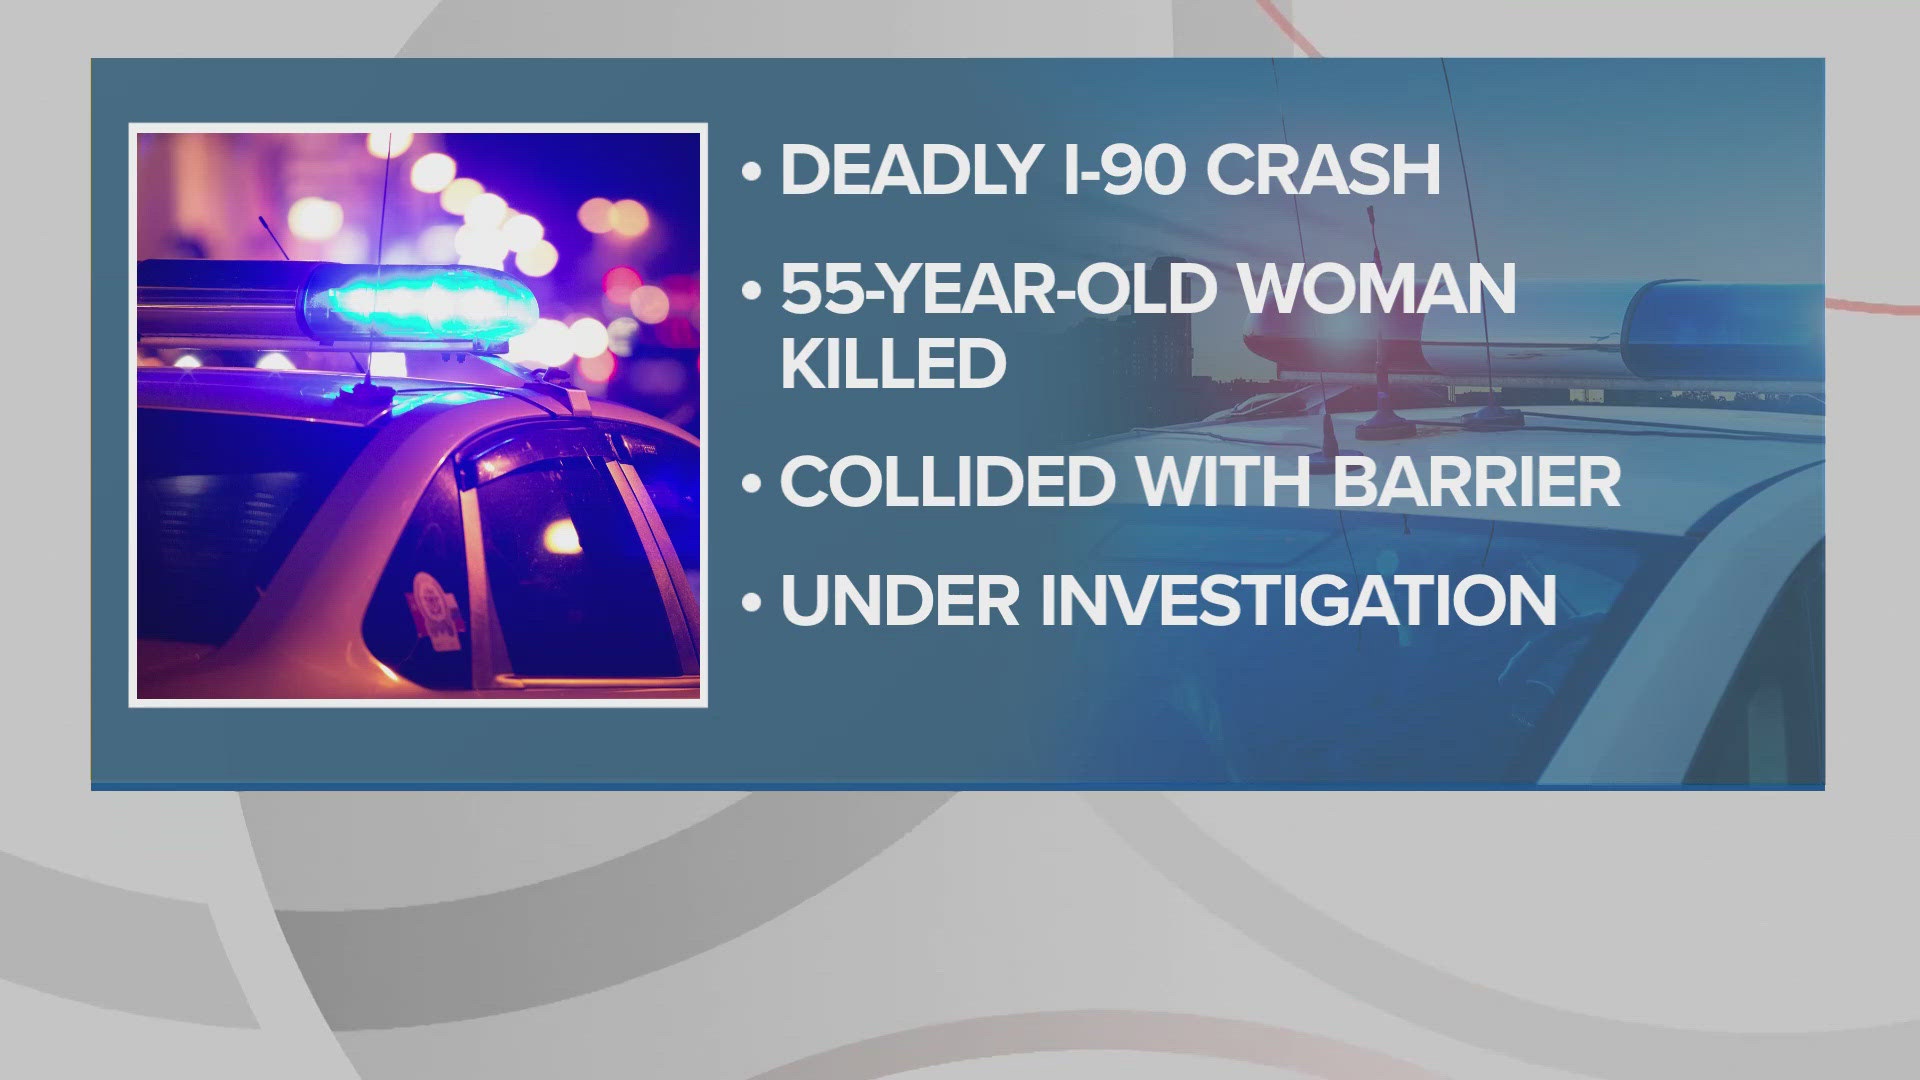 A woman was killed after her car veered into a traffic barrier on I-90 in Cleveland overnight Sunday, police said.